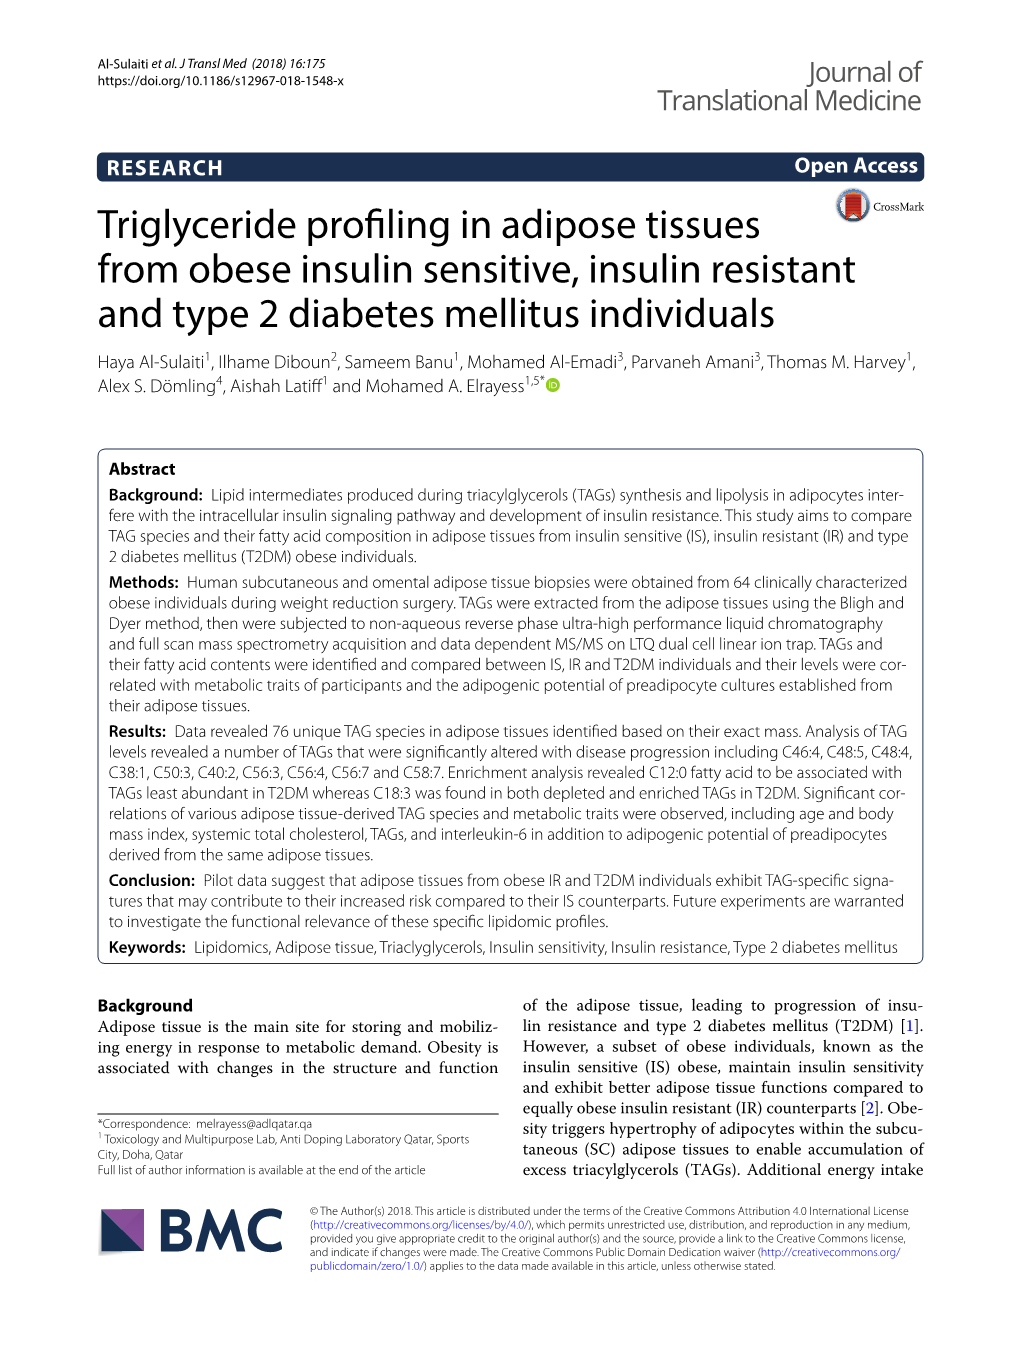 Triglyceride Profiling in Adipose Tissues from Obese Insulin Sensitive, Insulin Resistant and Type 2 Diabetes Mellitus Individua